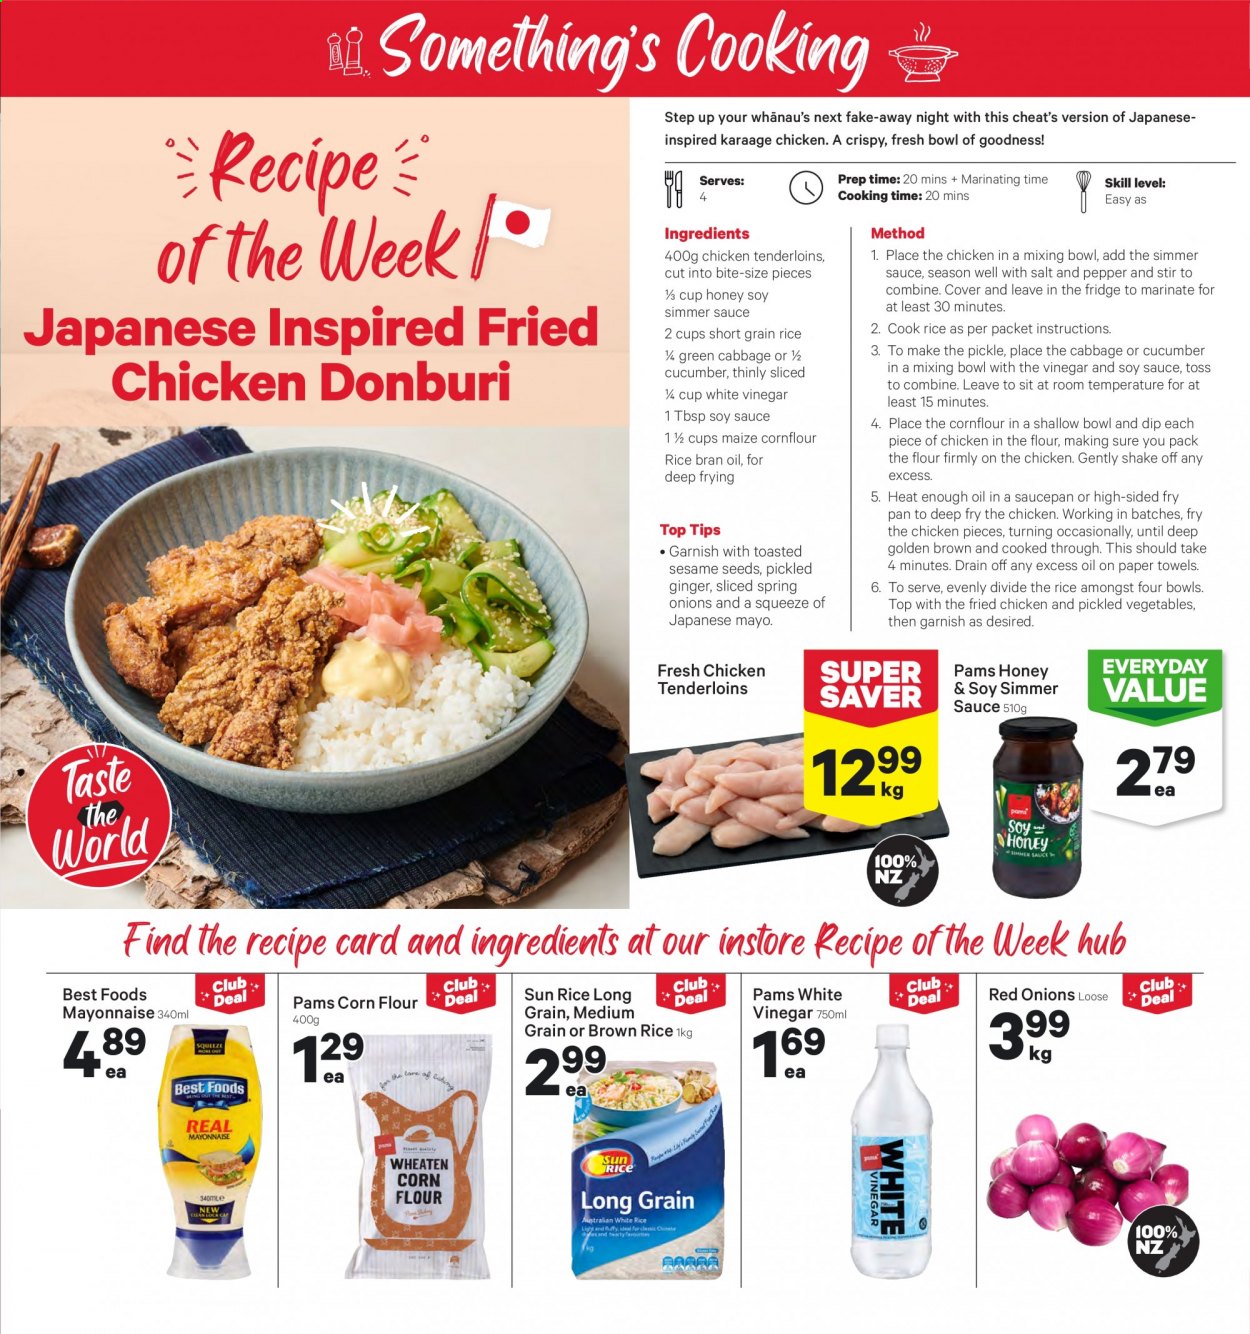 thumbnail - New World mailer - 09.08.2021 - 15.08.2021 - Sales products - ginger, red onions, onion, fried chicken, shake, mayonnaise, flour, corn flour, brown rice, short grain rice, pepper, soy sauce, vinegar, rais oil, honey, kitchen towels, Sure. Page 3.